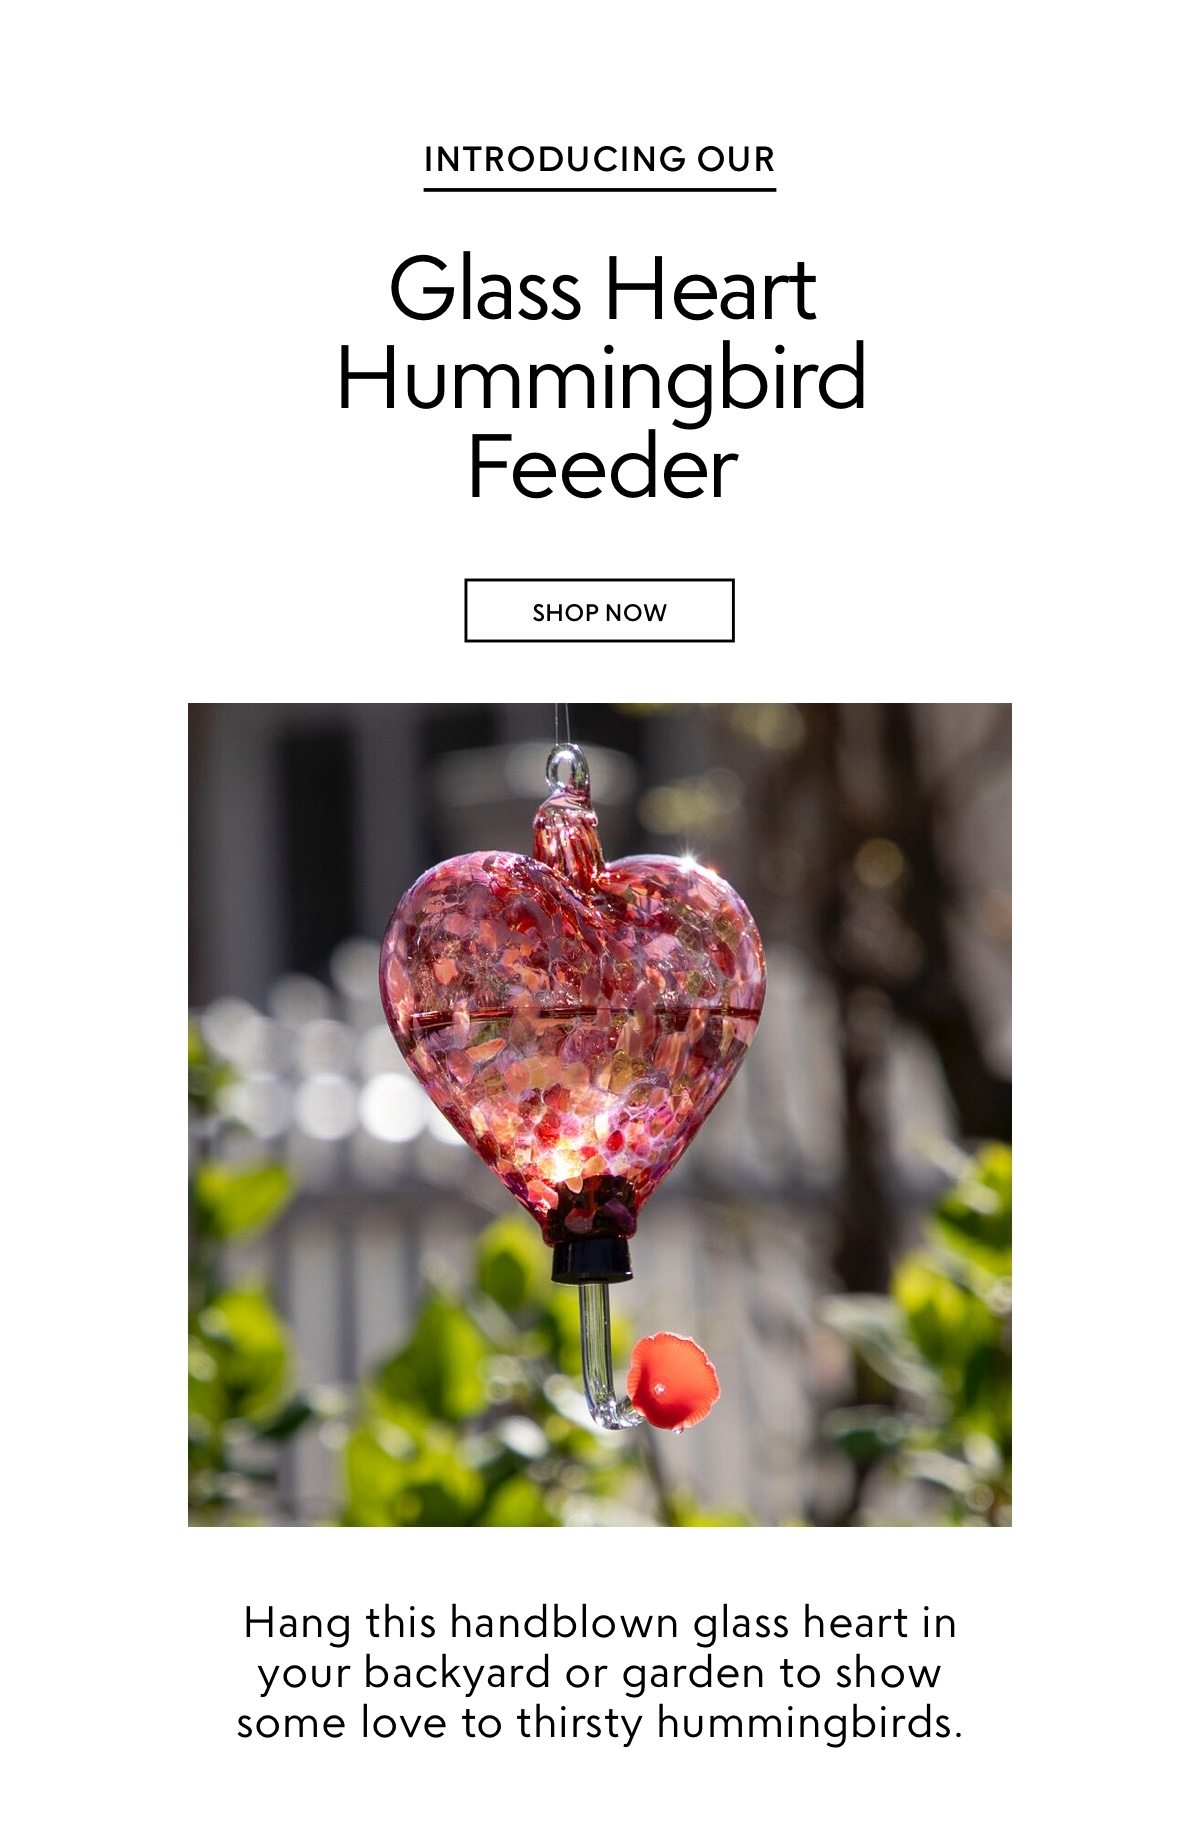 Introducing the Glass Heart Hummingbird Feeder. Hang this handblown glass heart in your backyard or garden to show some love to thirsty hummingbirds. Shop now.